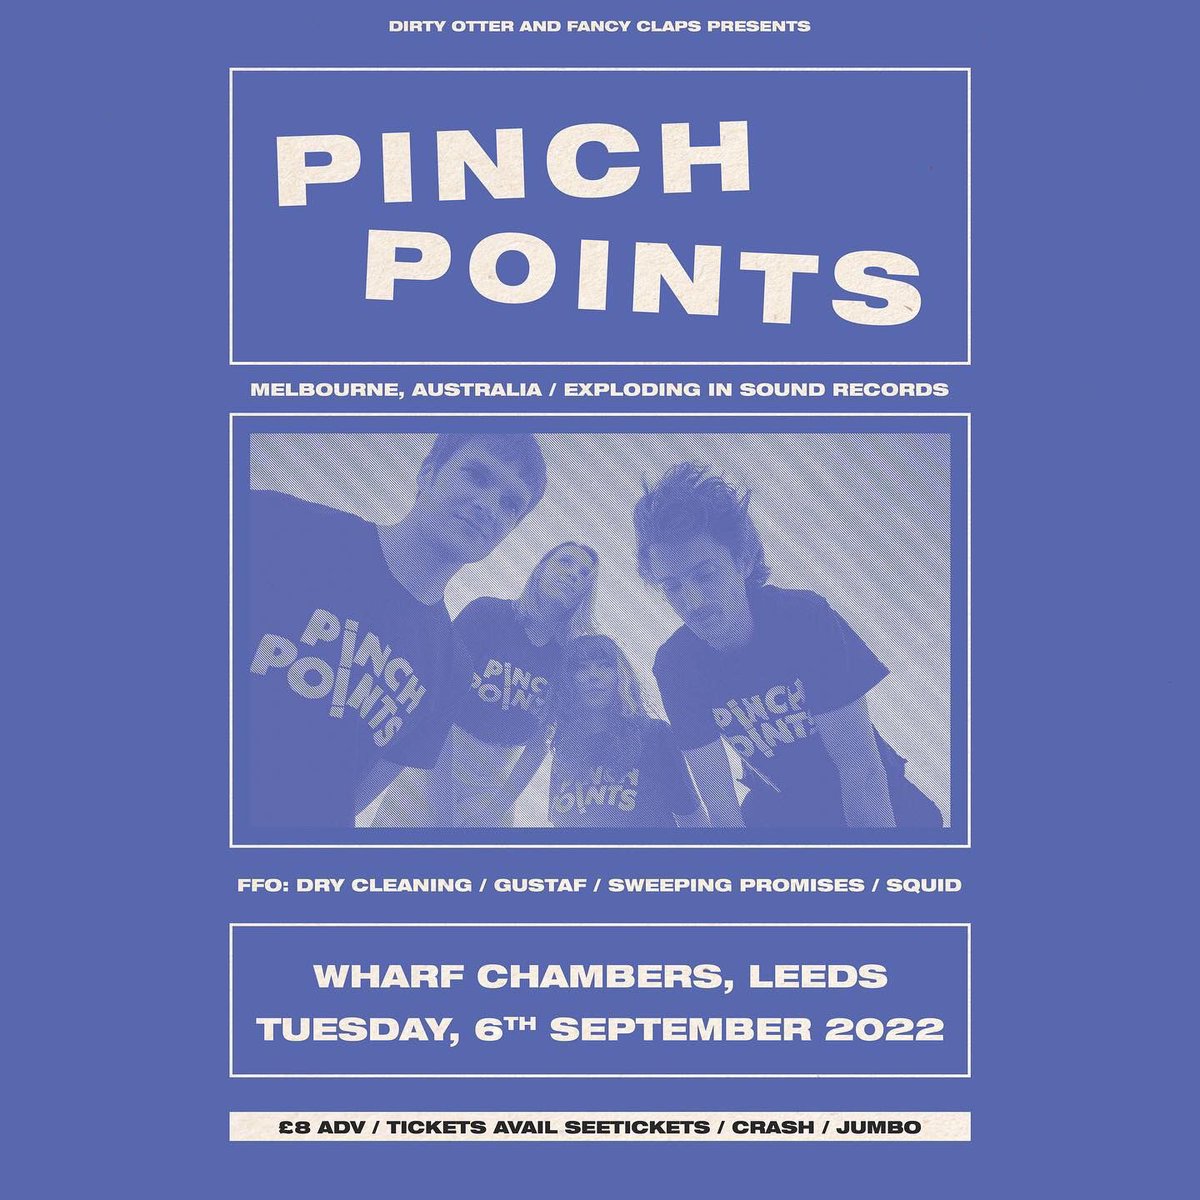 One week tomorrow at @WharfChambersCC 💕 PINCH POINTS w/ Pifco & @heatwrays Tickets: seetickets.com/event/pinch-po… Negative LFT required for entry.